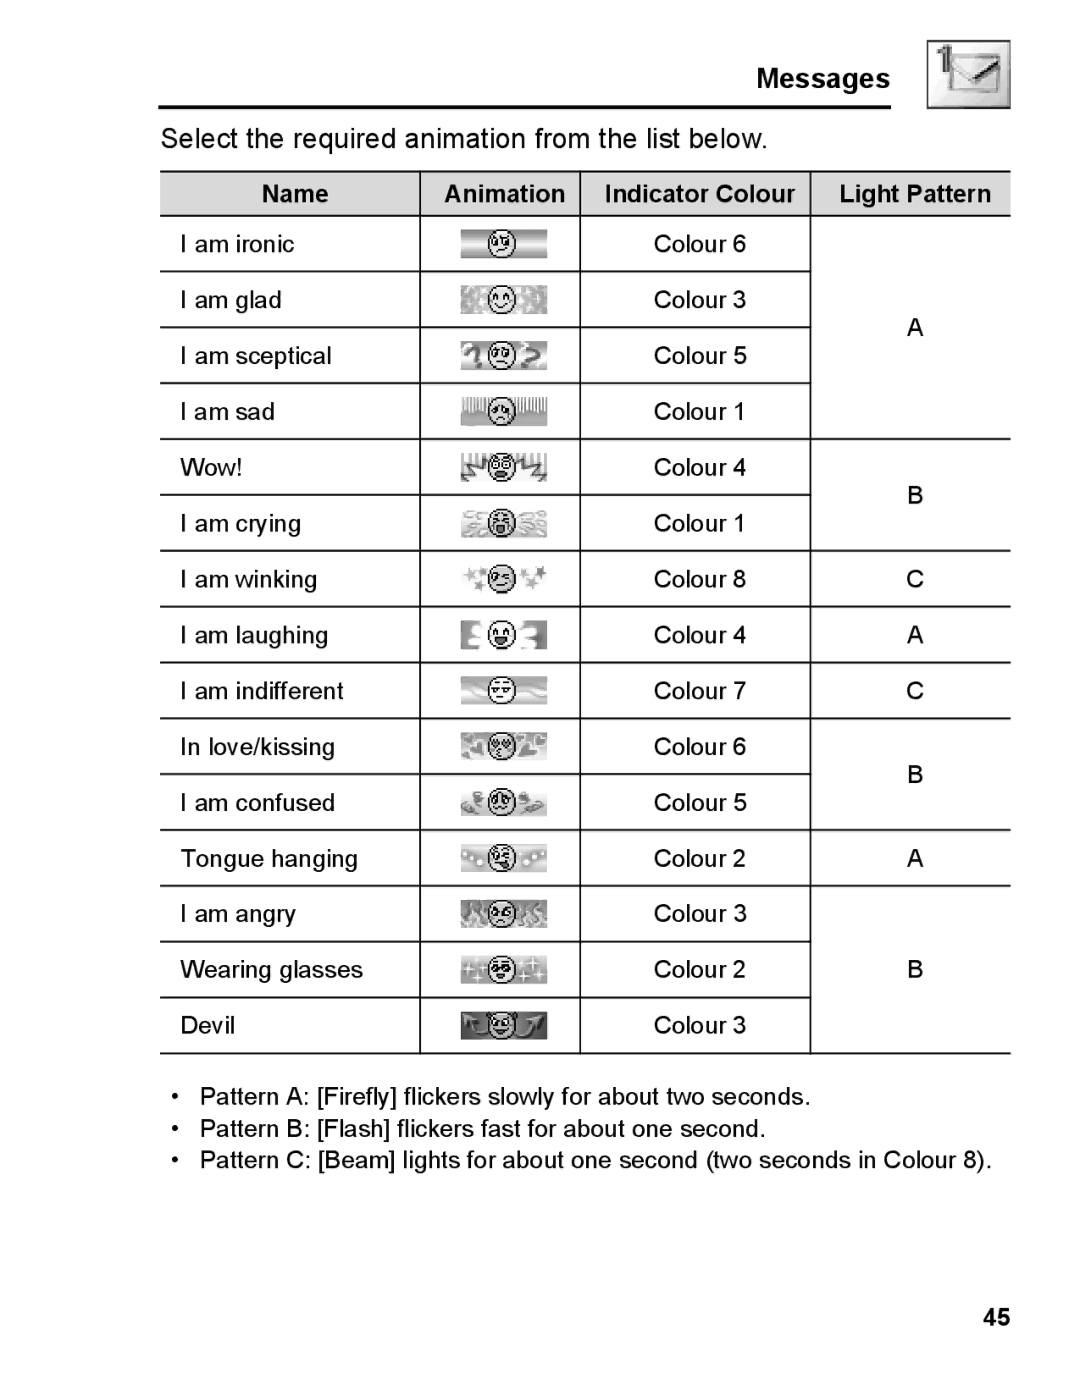 Panasonic A210 manual Select the required animation from the list below, Name Animation 